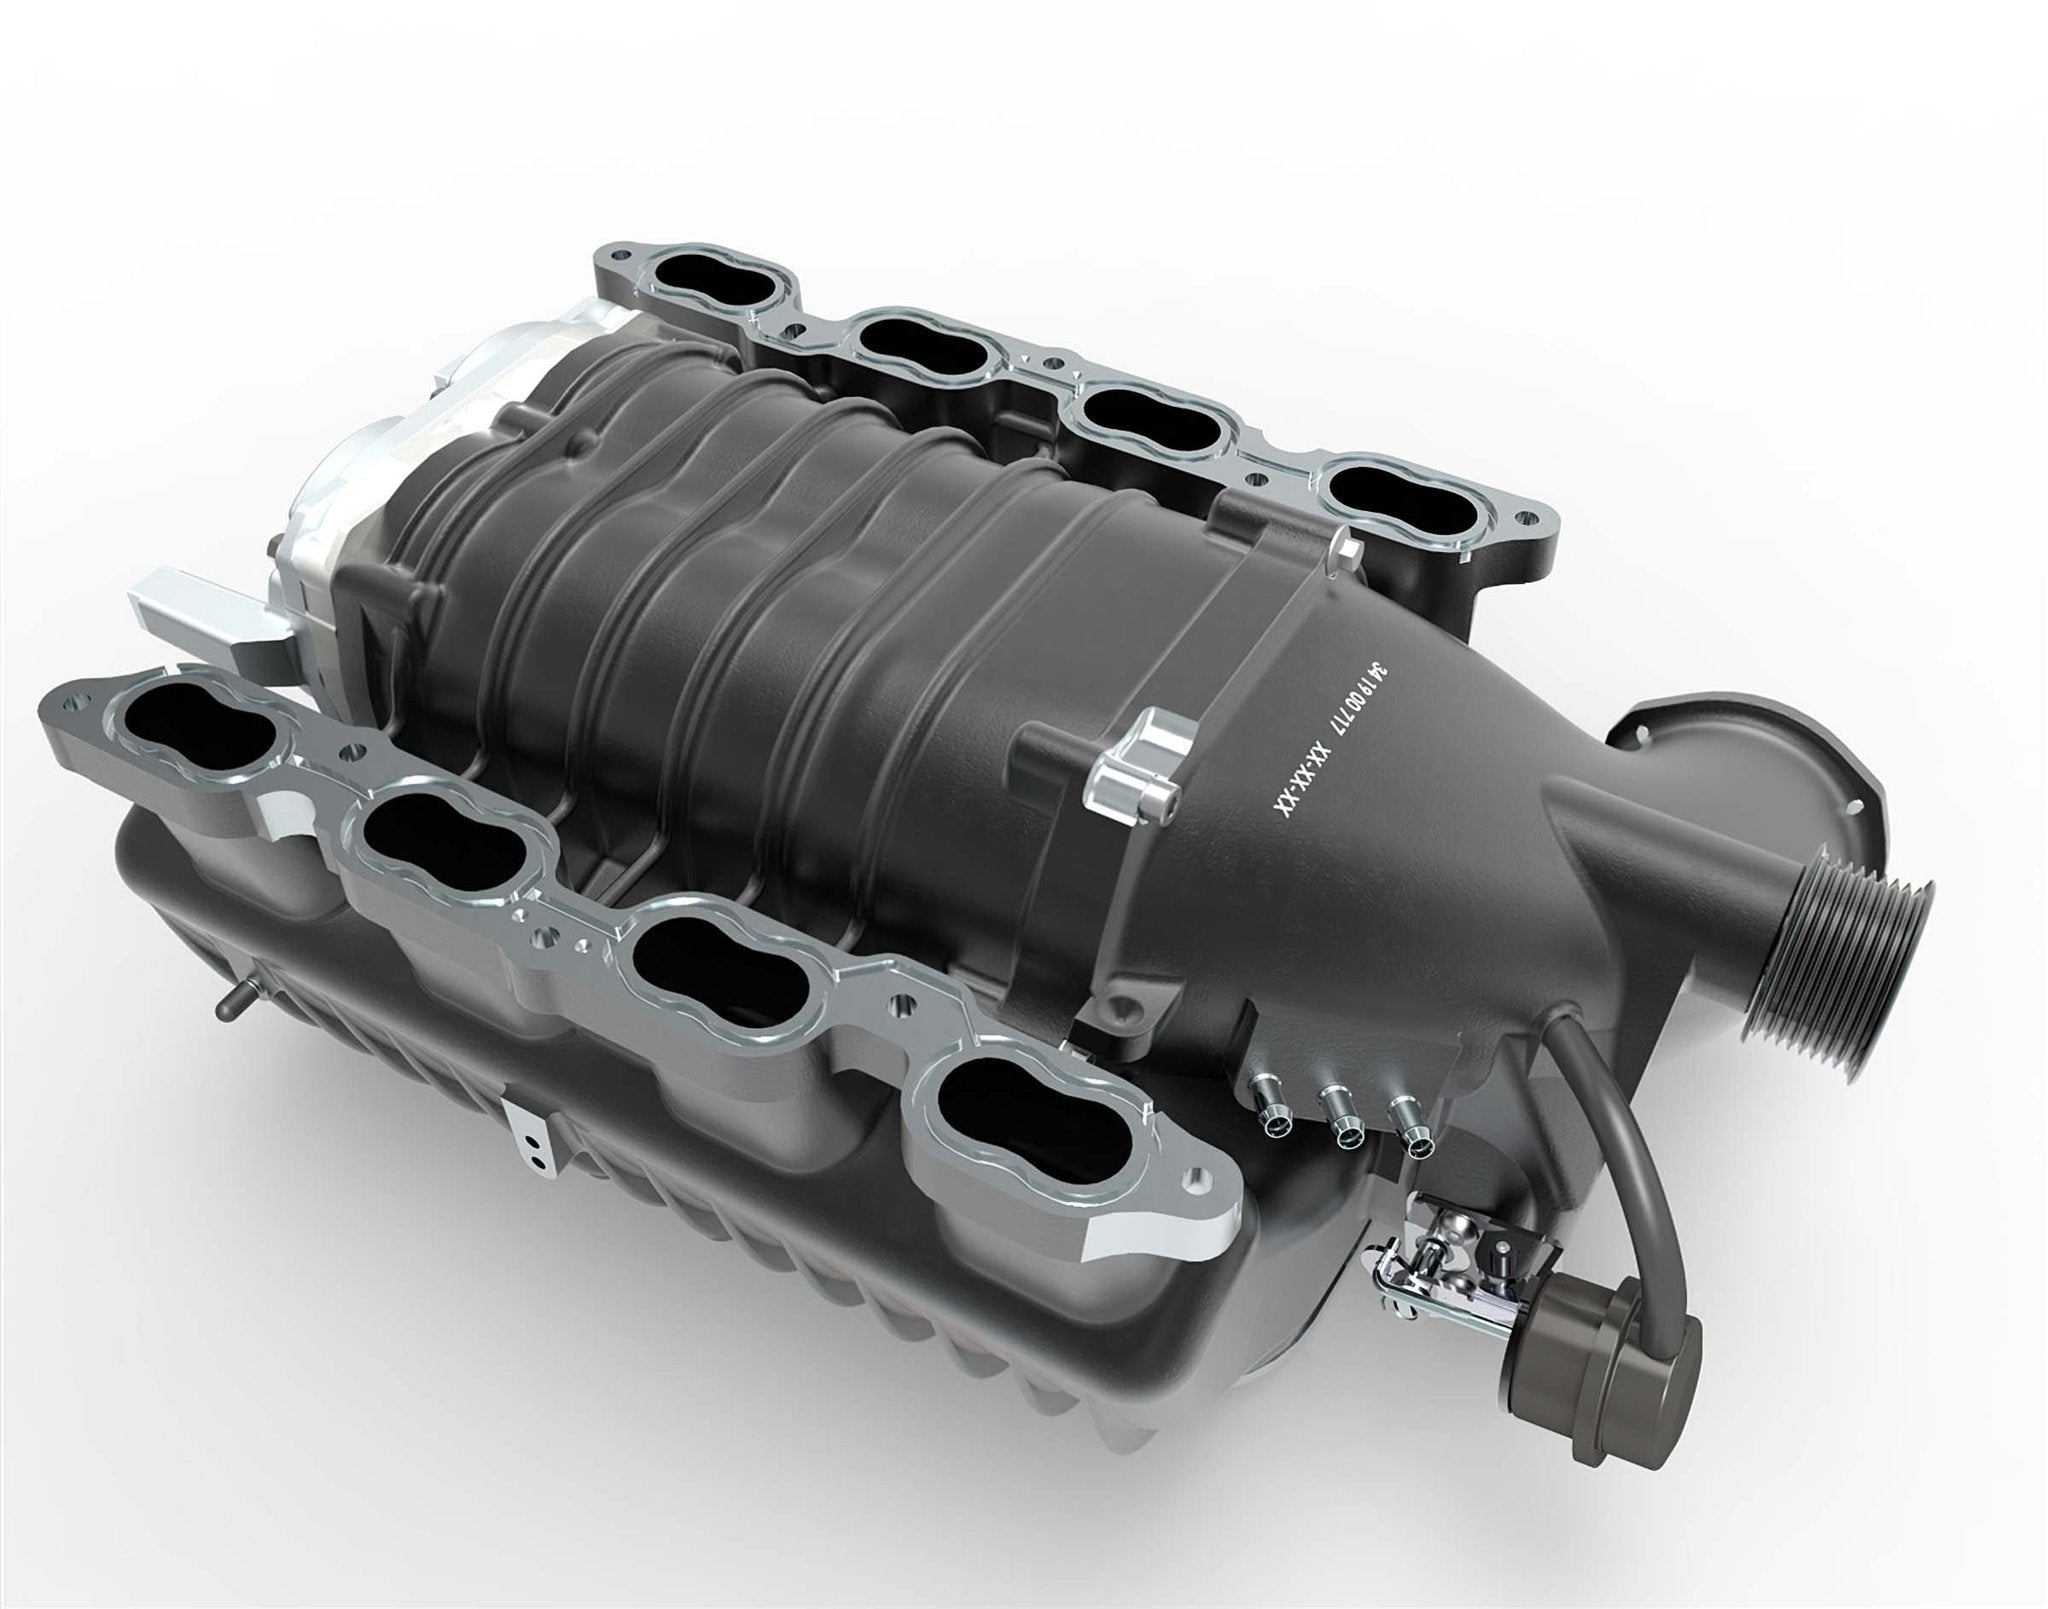 '19-21 Toyota Tundra TVS1900 Supercharger System Magnuson Superchargers (bottom view)